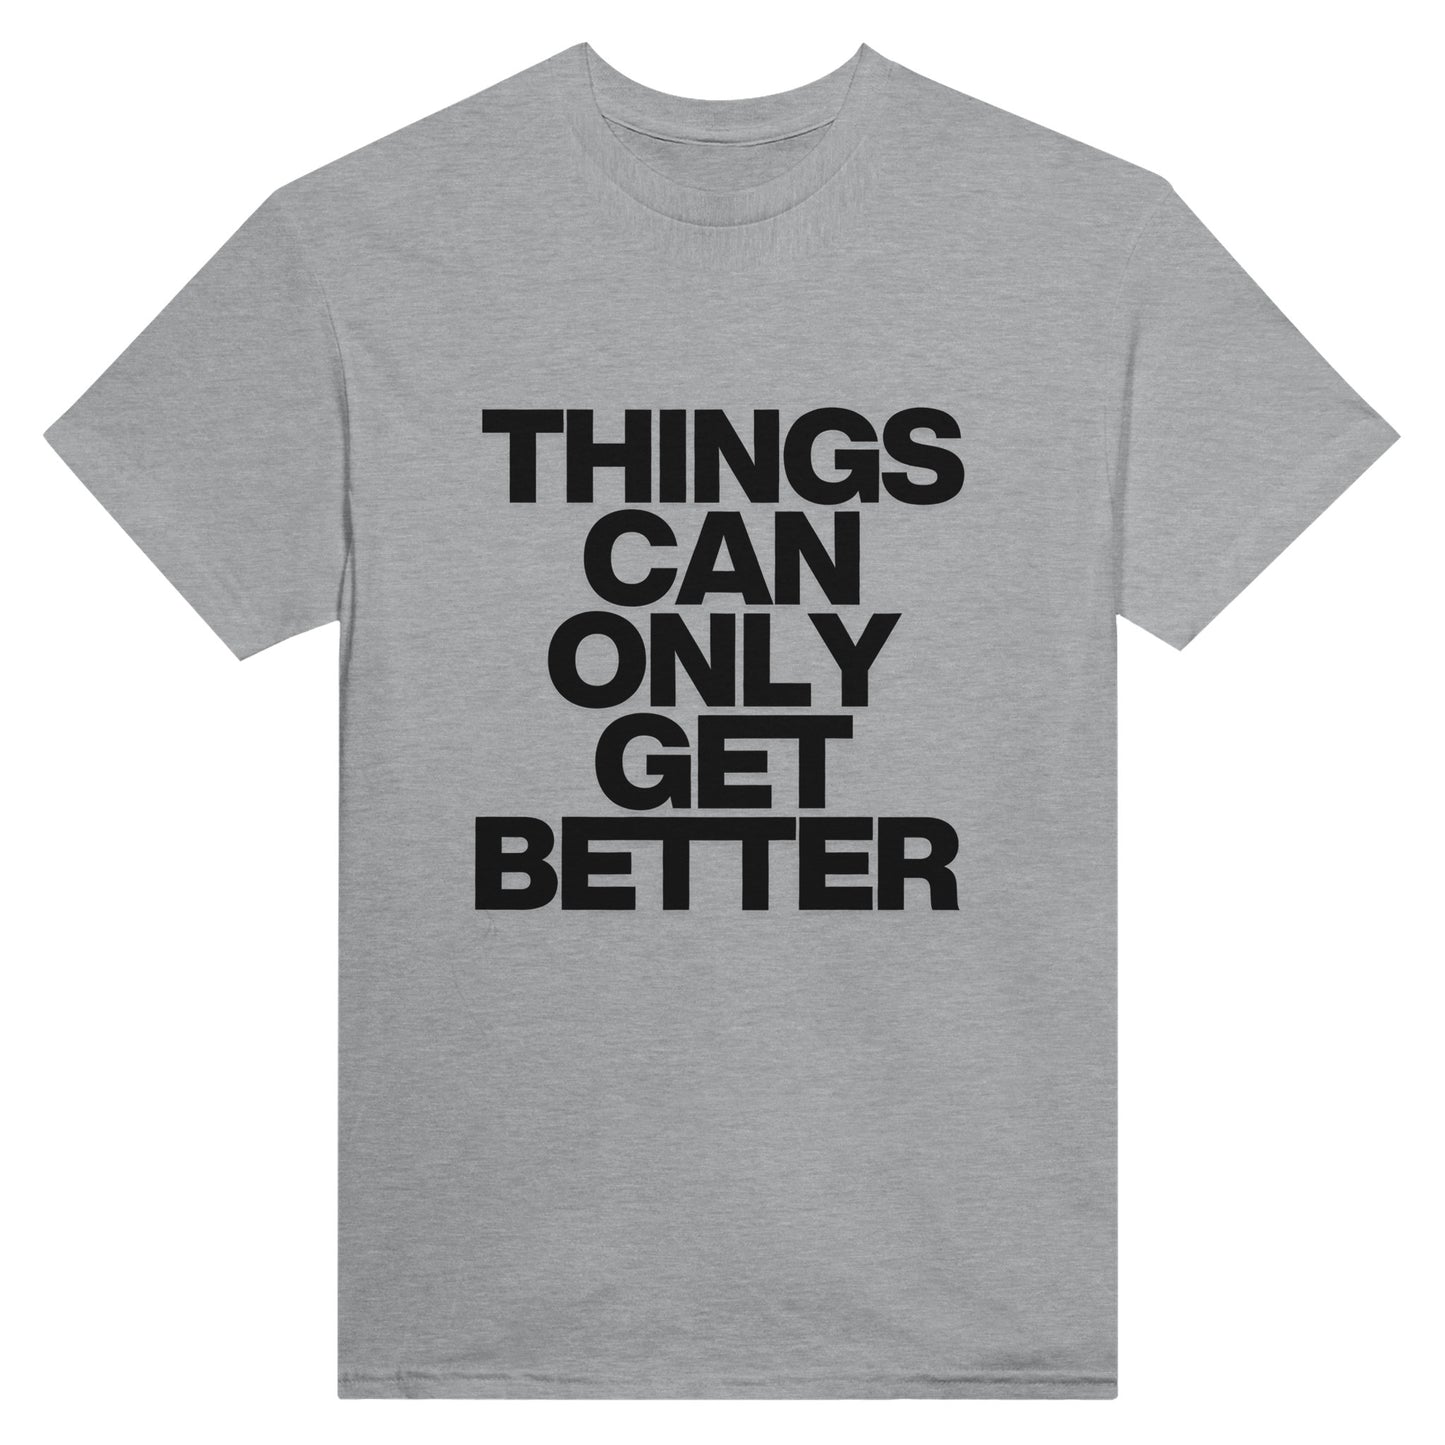 Things Can Only Get Better T-shirt in grey - anti-tory election wear